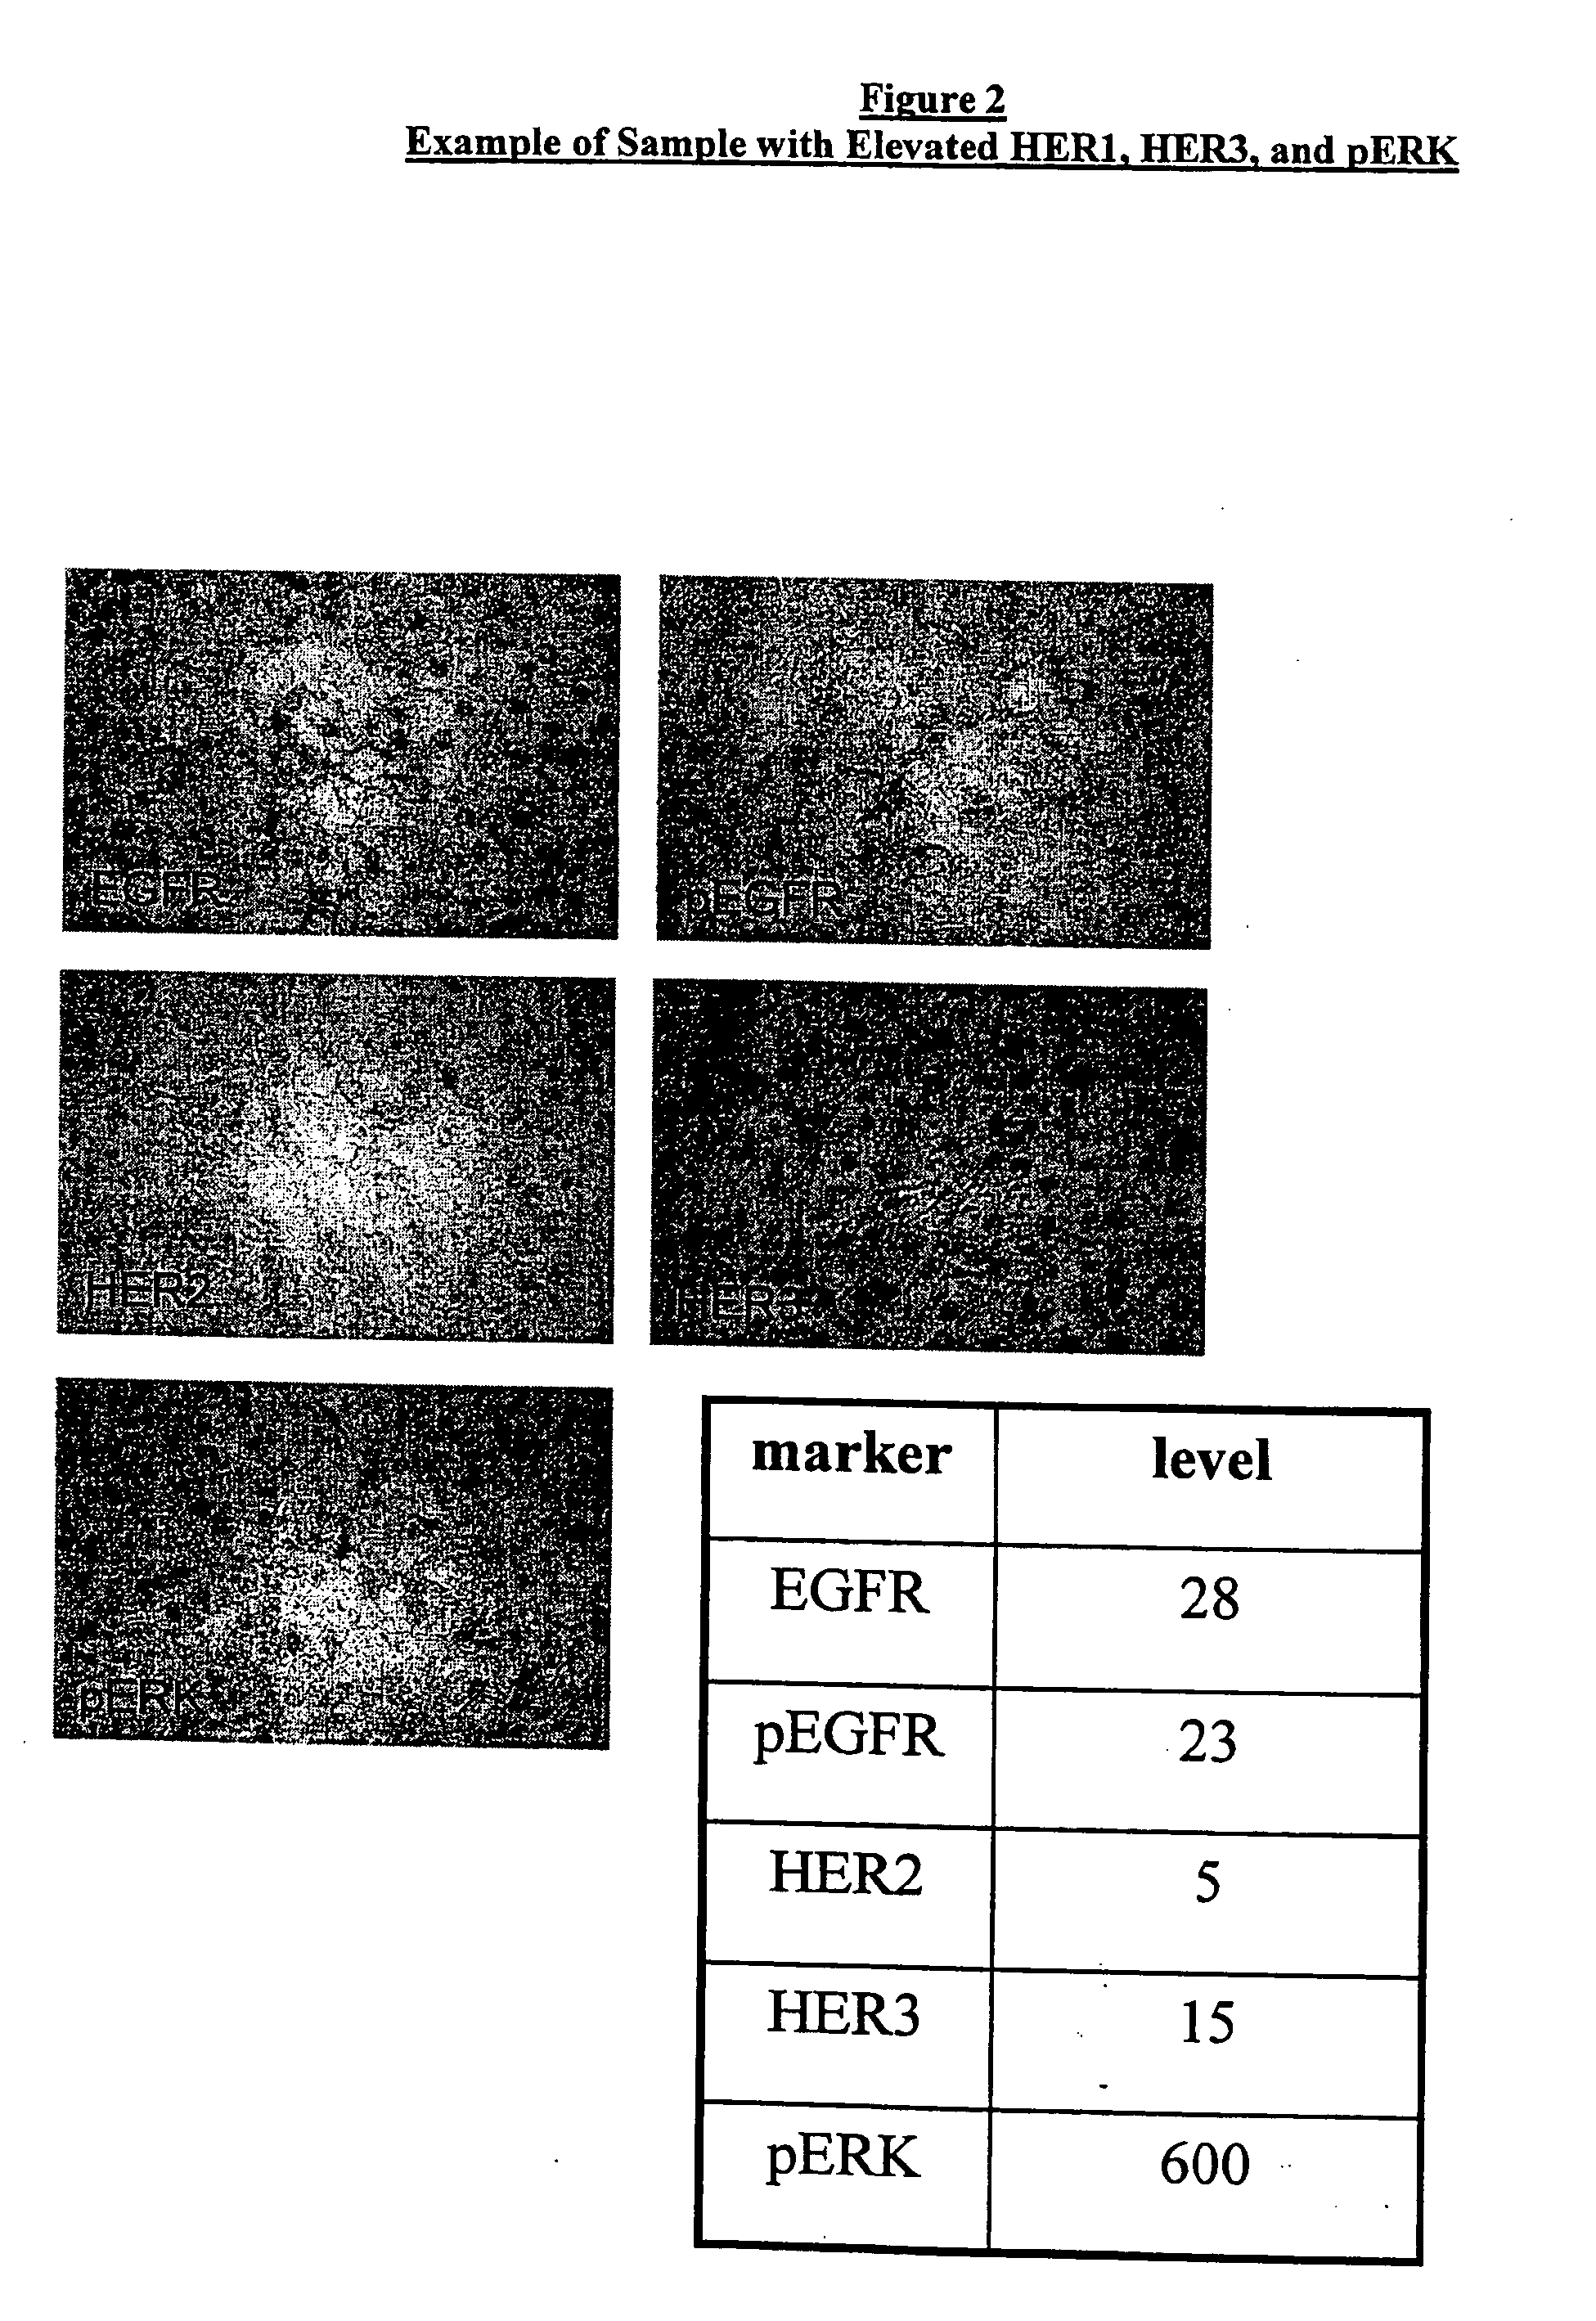 Method for Predicting Response to Epidermal Growth Factor Receptor-Directed Therapy